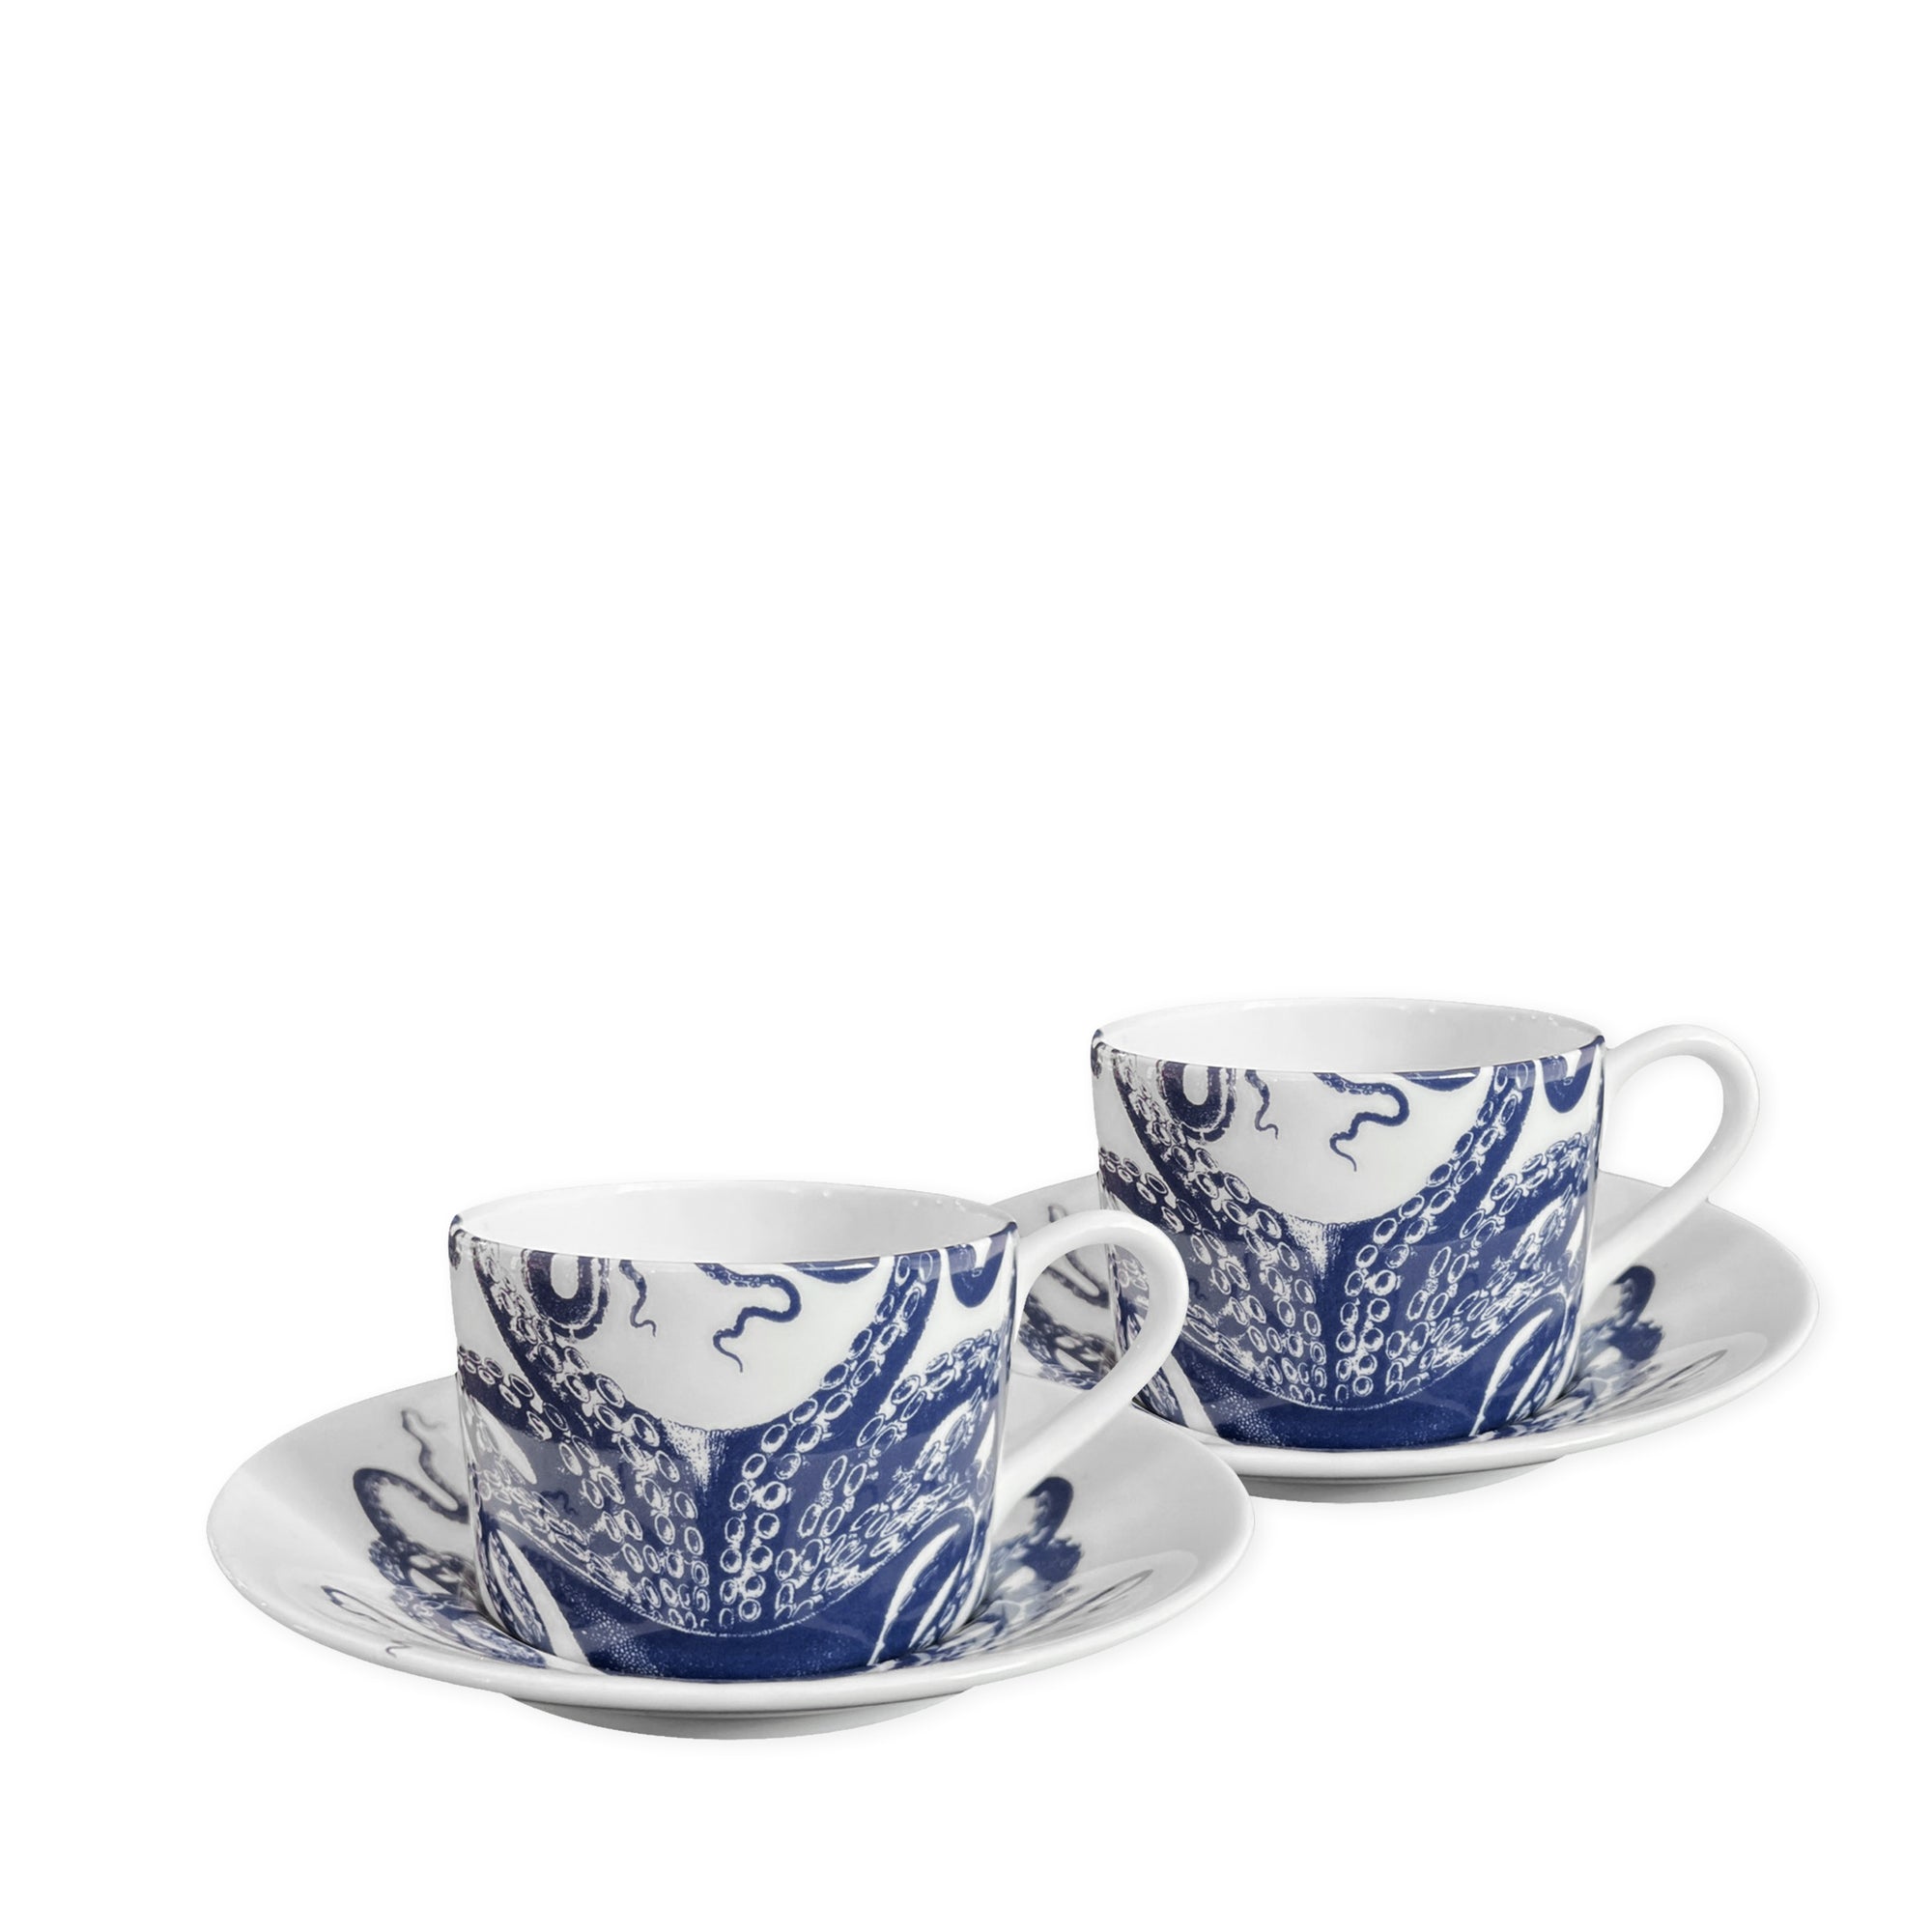 Two white ceramic teacups and saucers featuring charming blue octopus designs, crafted from bone china and dishwasher safe are known as the Lucy Cups & Saucers, Set of 2 by Caskata.